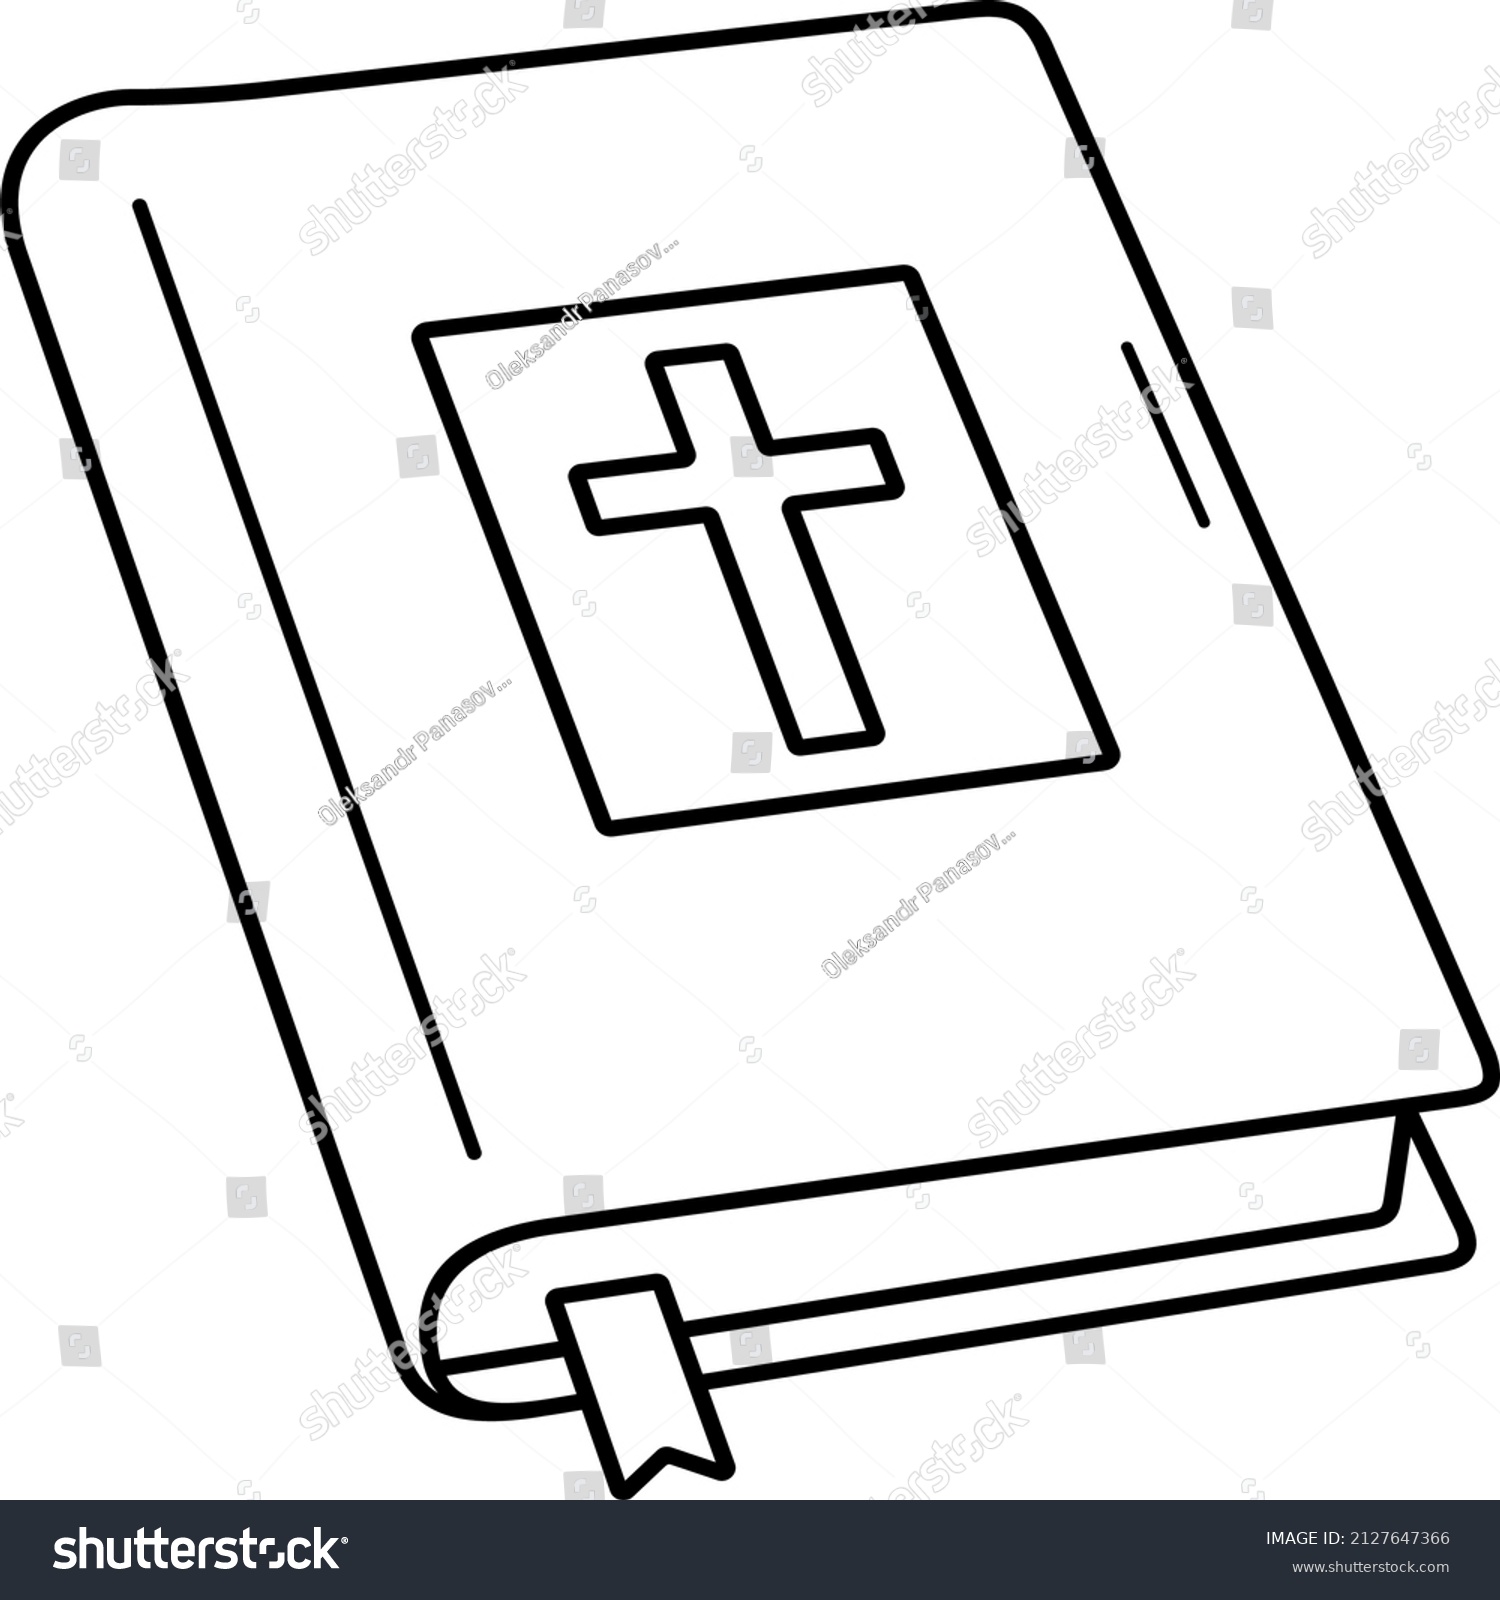 Bible Book Vector Outline Illustration Stock Vector (Royalty Free ...